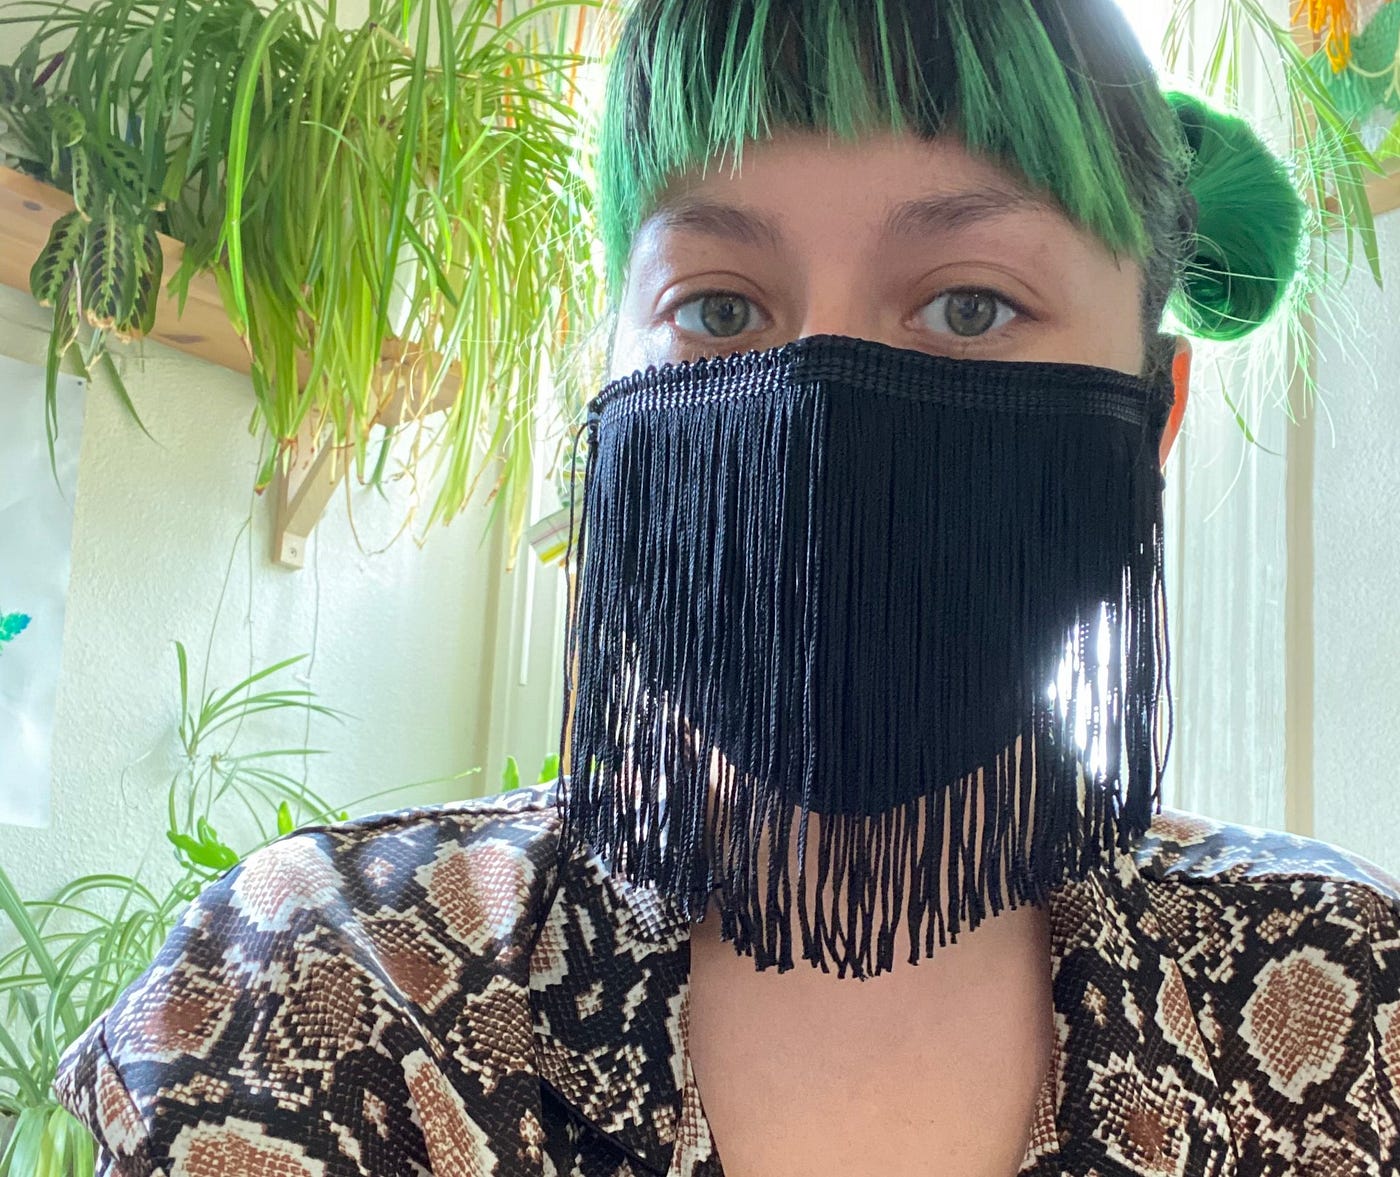 Meet the Fringe Mask—and the San Francisco Maker Behind This